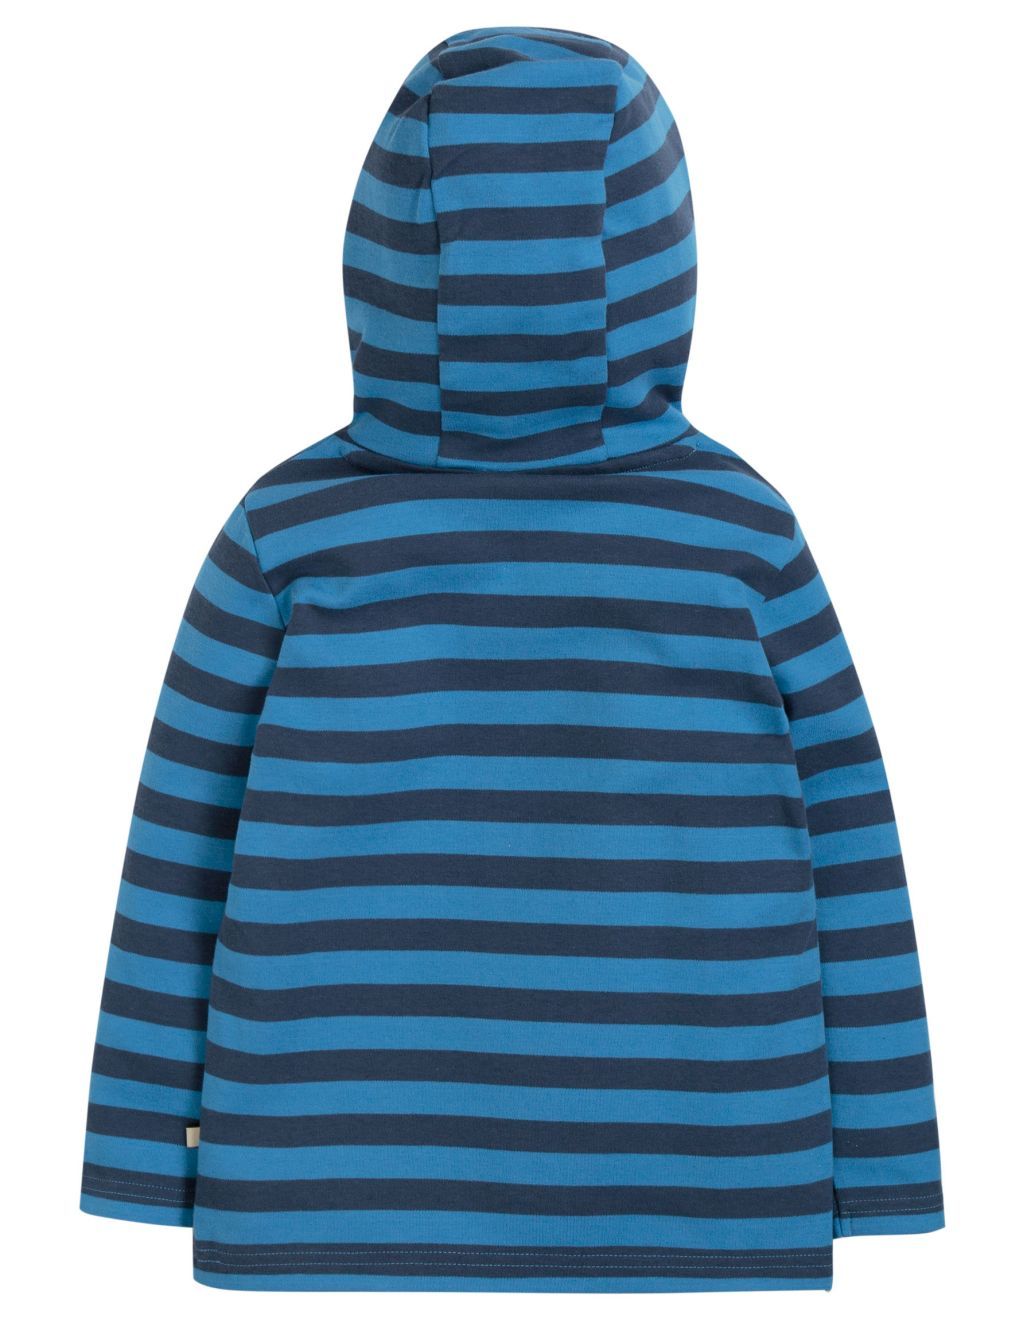 Campfire Hooded Top sail blue stripe/Angler Fish 128/134